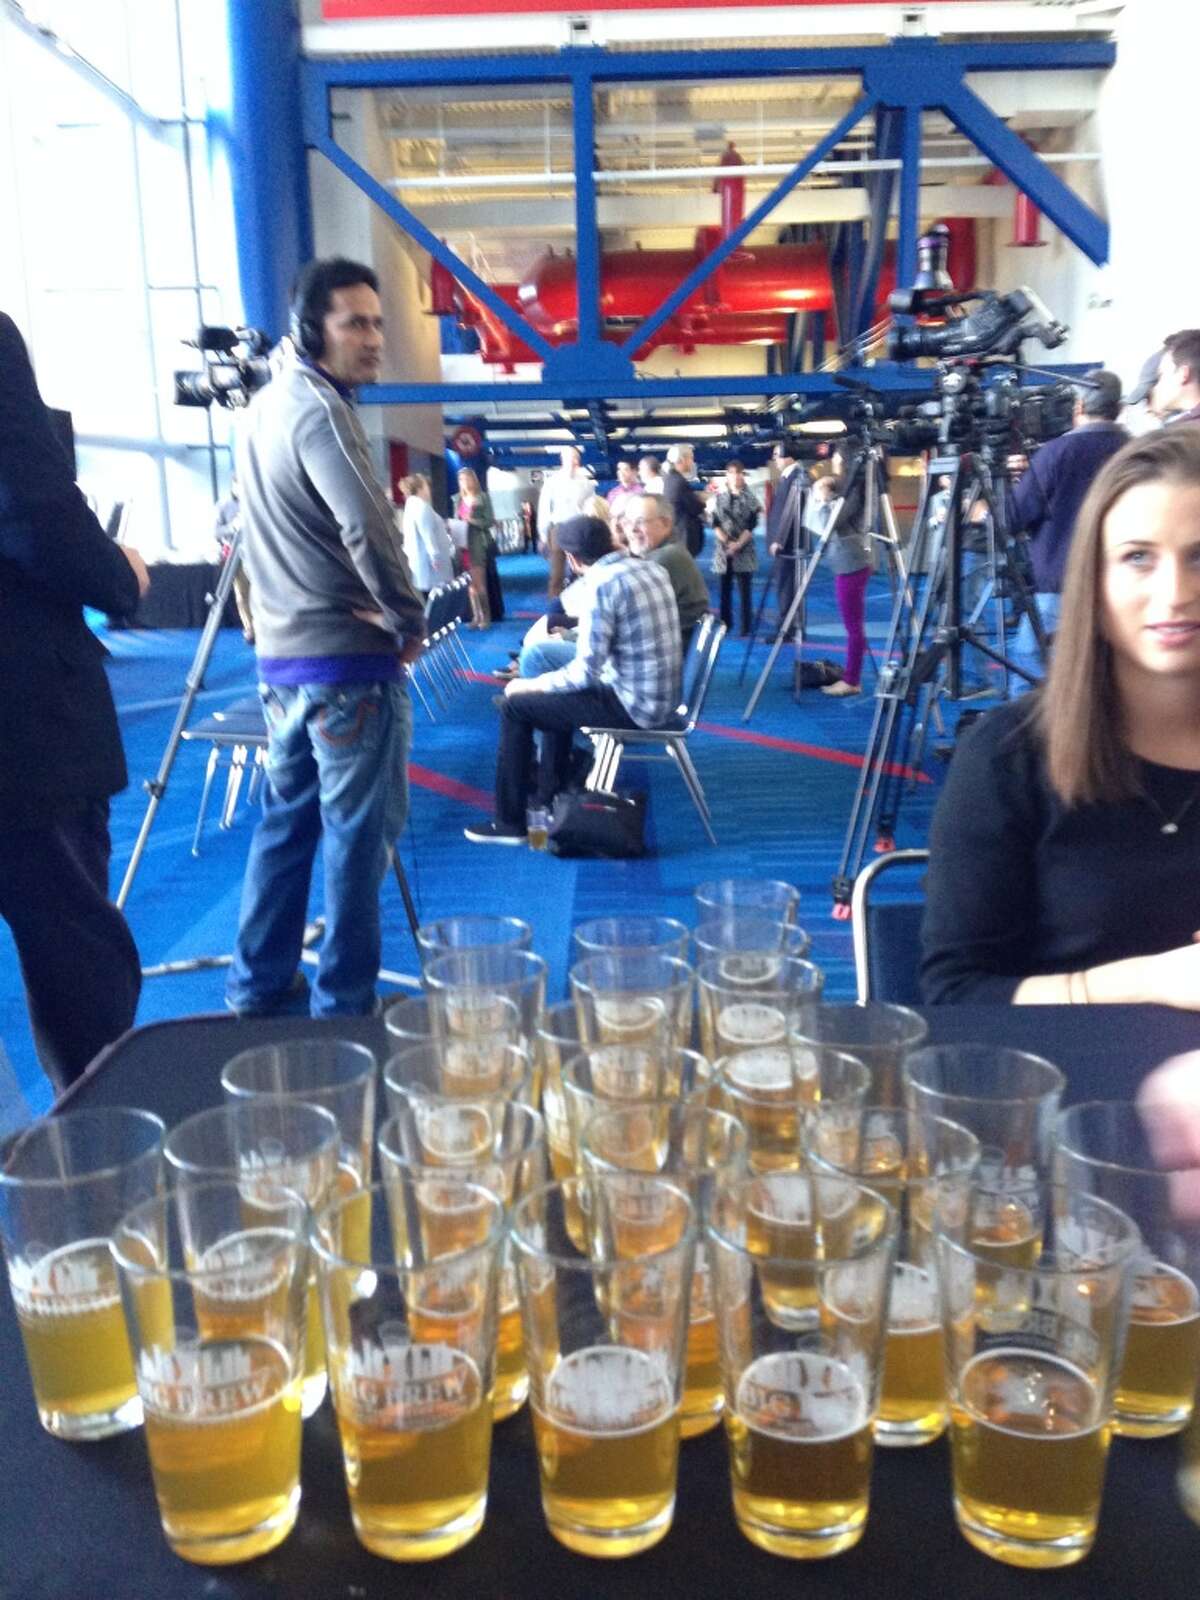 Organizers of the news conference set out glasses with Saint Arnold beer for a post-announcement toast.